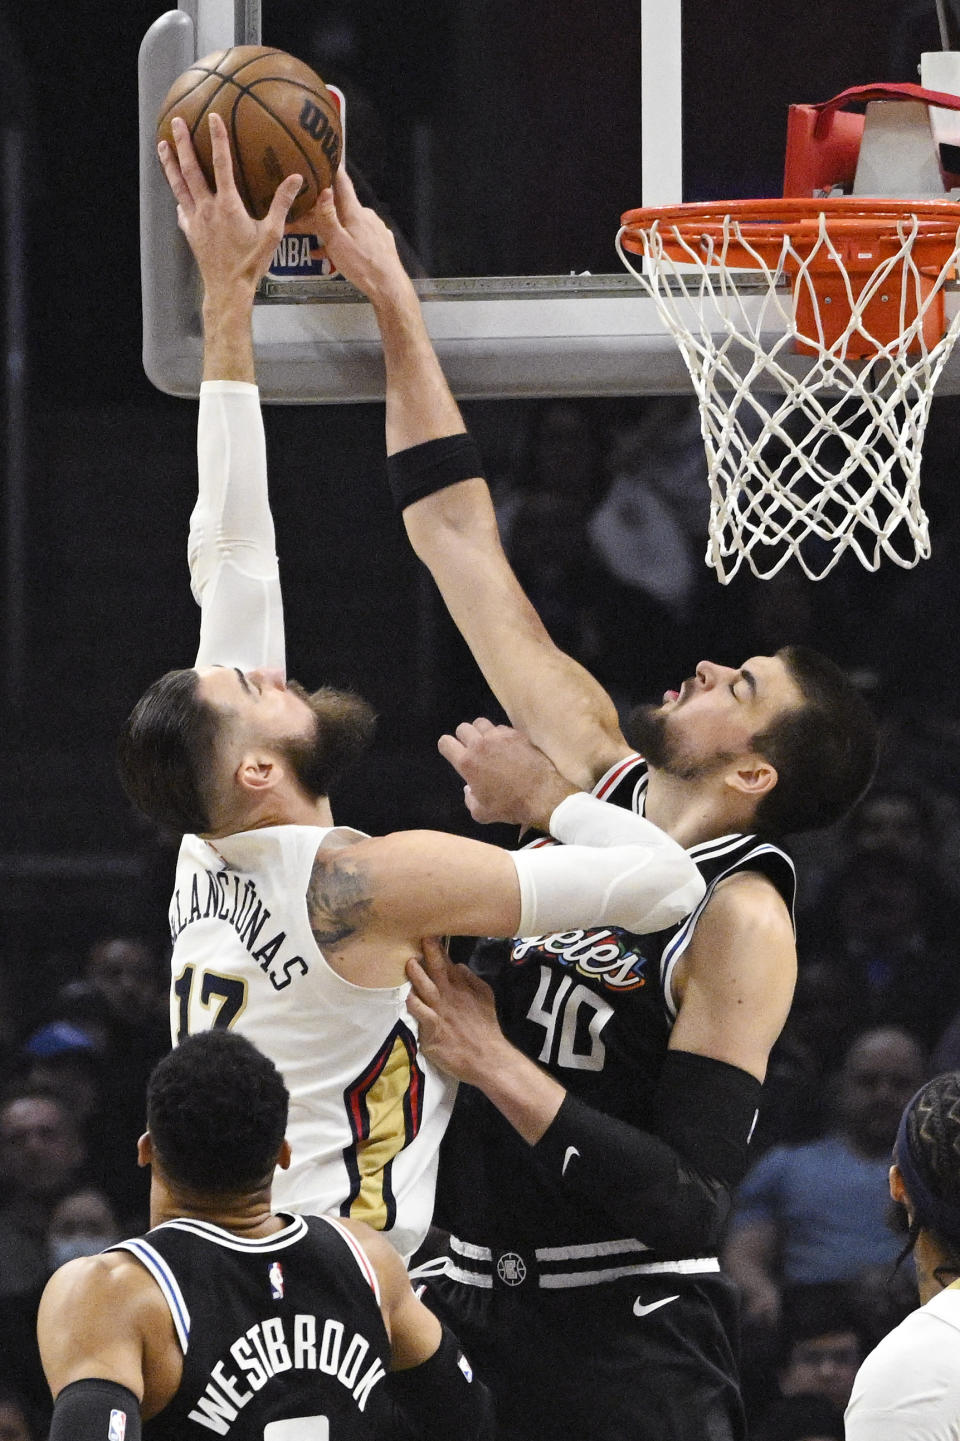 New Orleans Pelicans center Jonas Valanciunas, left, has his shot blocked by Los Angeles Clippers center Ivica Zubac during the first half of an NBA basketball game Saturday, March 25, 2023, in Los Angeles. (AP Photo/Mark J. Terrill)